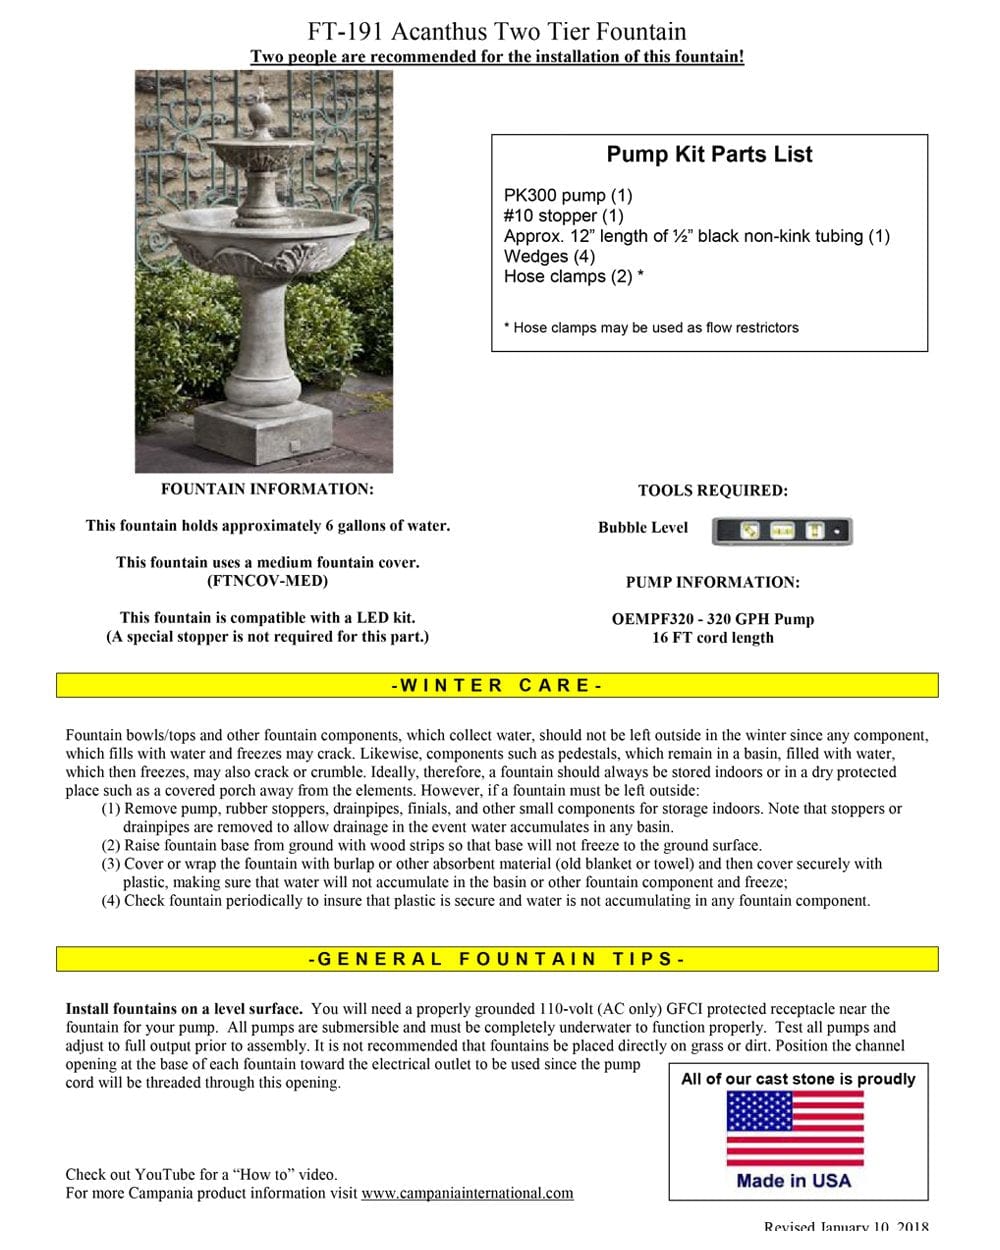 Acanthus Two Tiered Water Fountain - Outdoor Art Pros